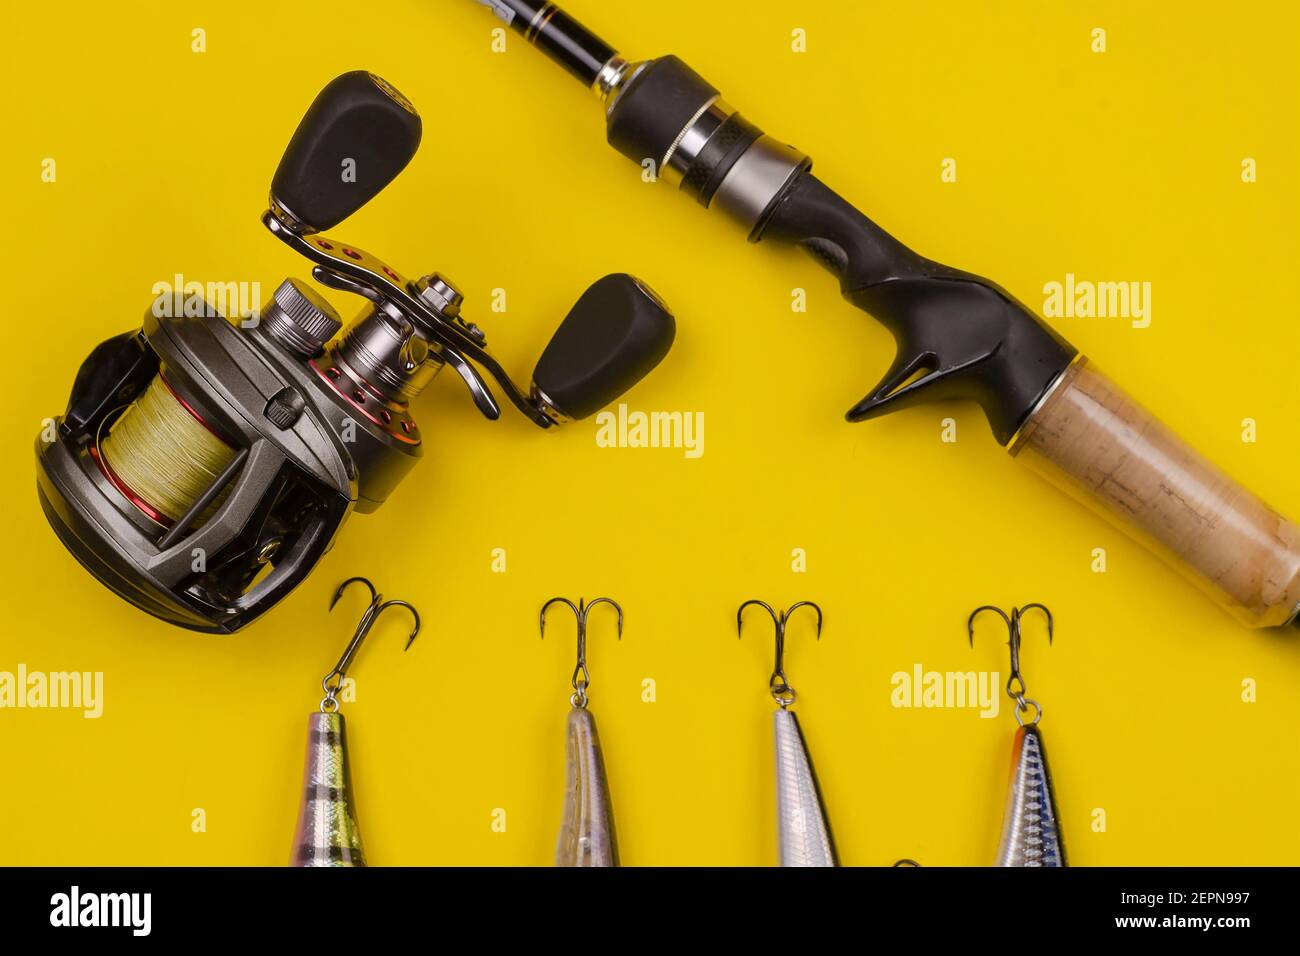 Fishing rod baitcasting reel and baits on a yellow background